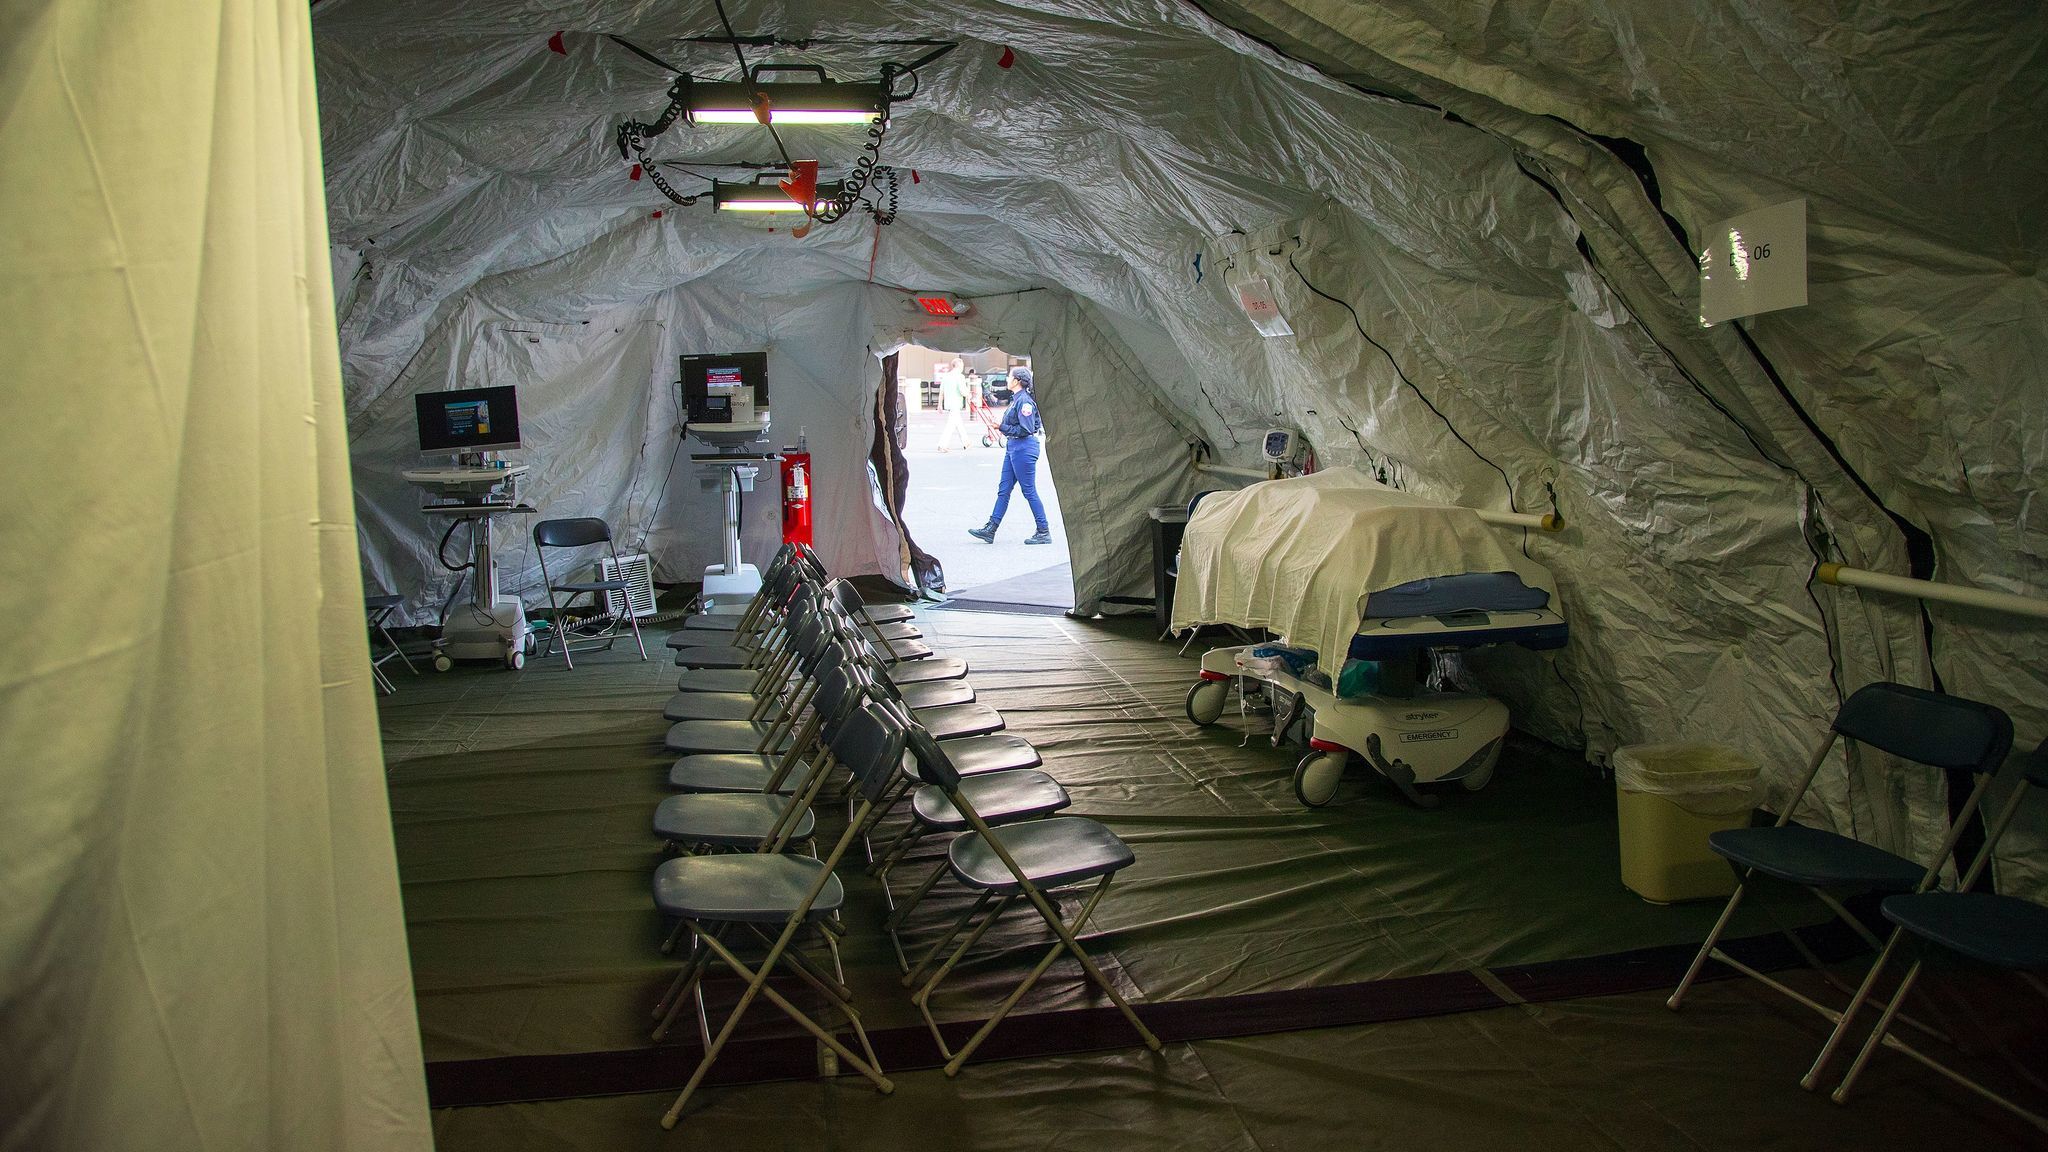 LOMA LINDA, CA - JANUARY 16, 2018: A military grade medical tent is set up in the parking lot for